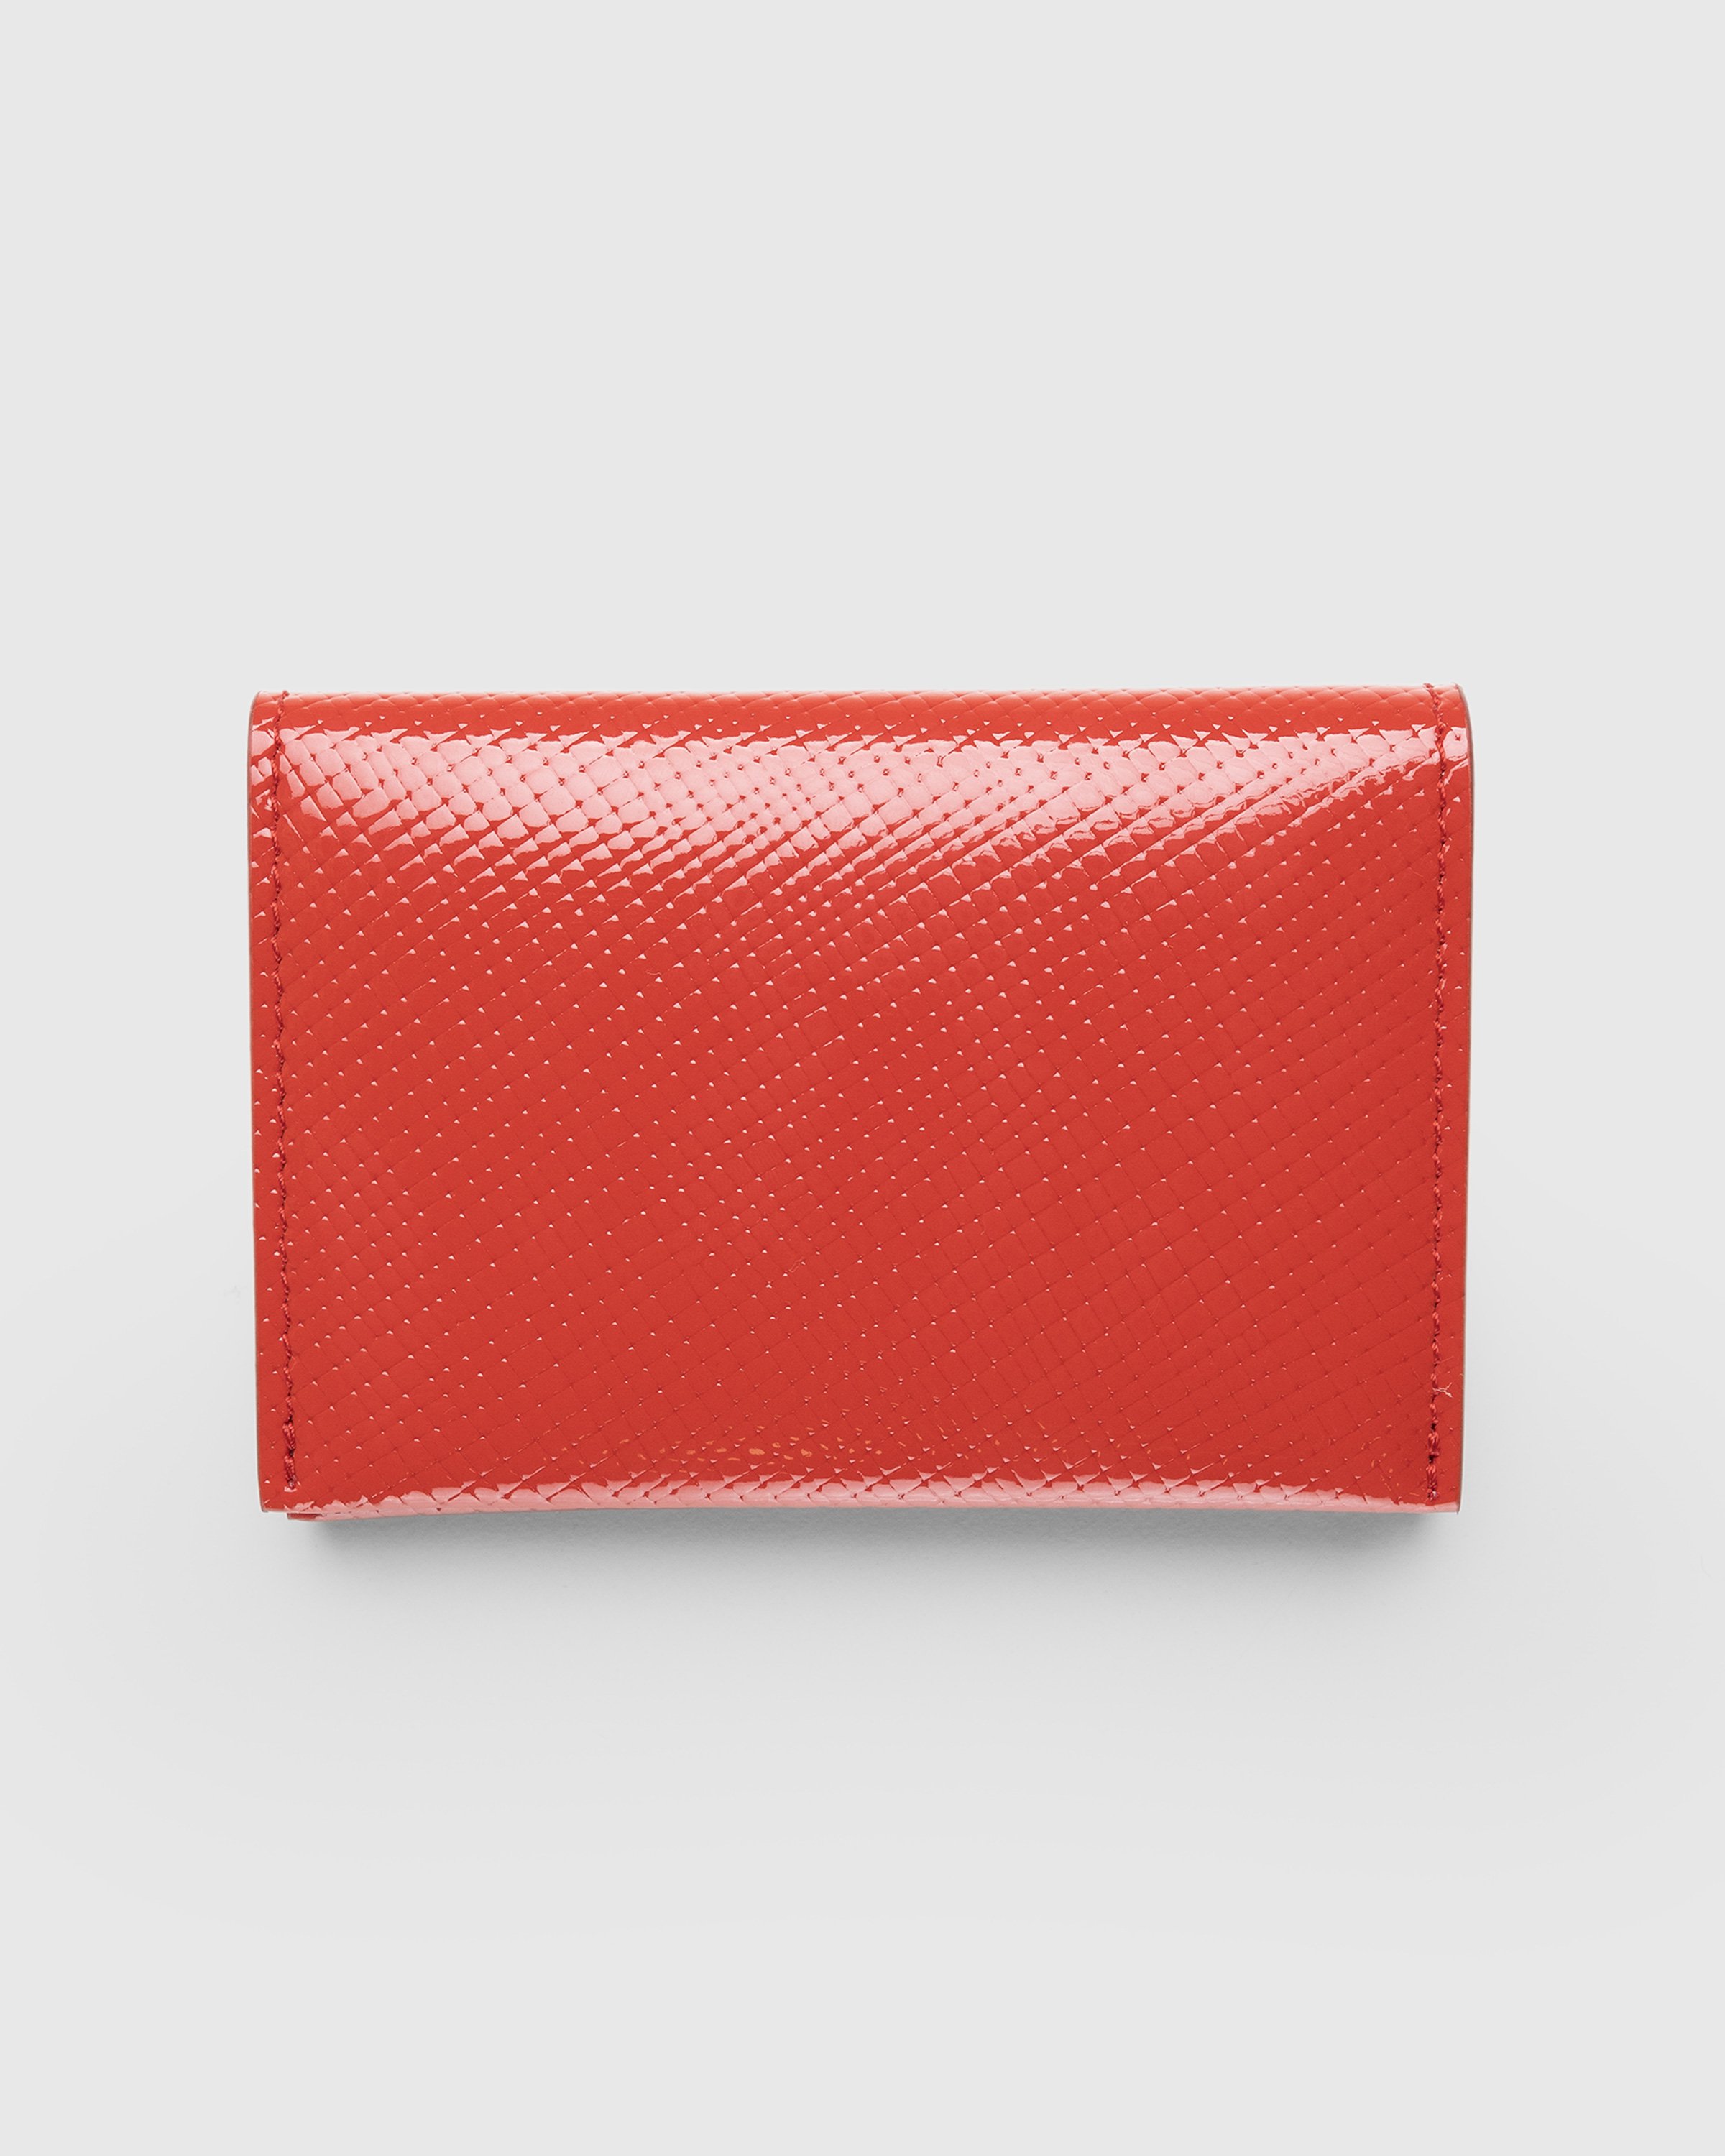 Acne Studios - Folded Card Holder Red - Accessories - Red - Image 2